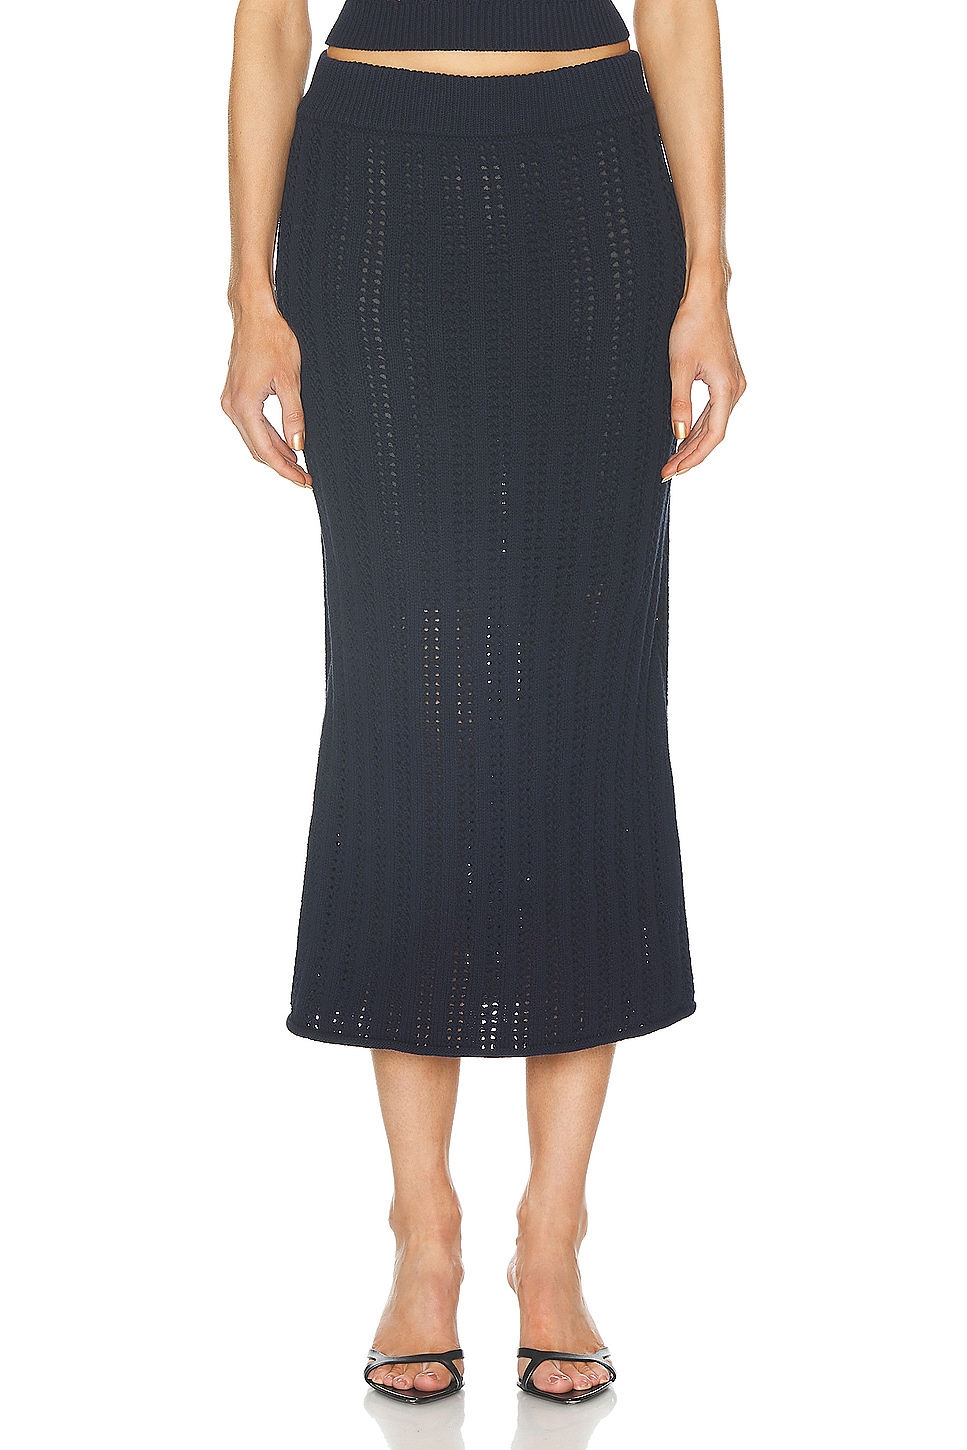 Image 1 of A.L.C. Aurora Skirt in Navy